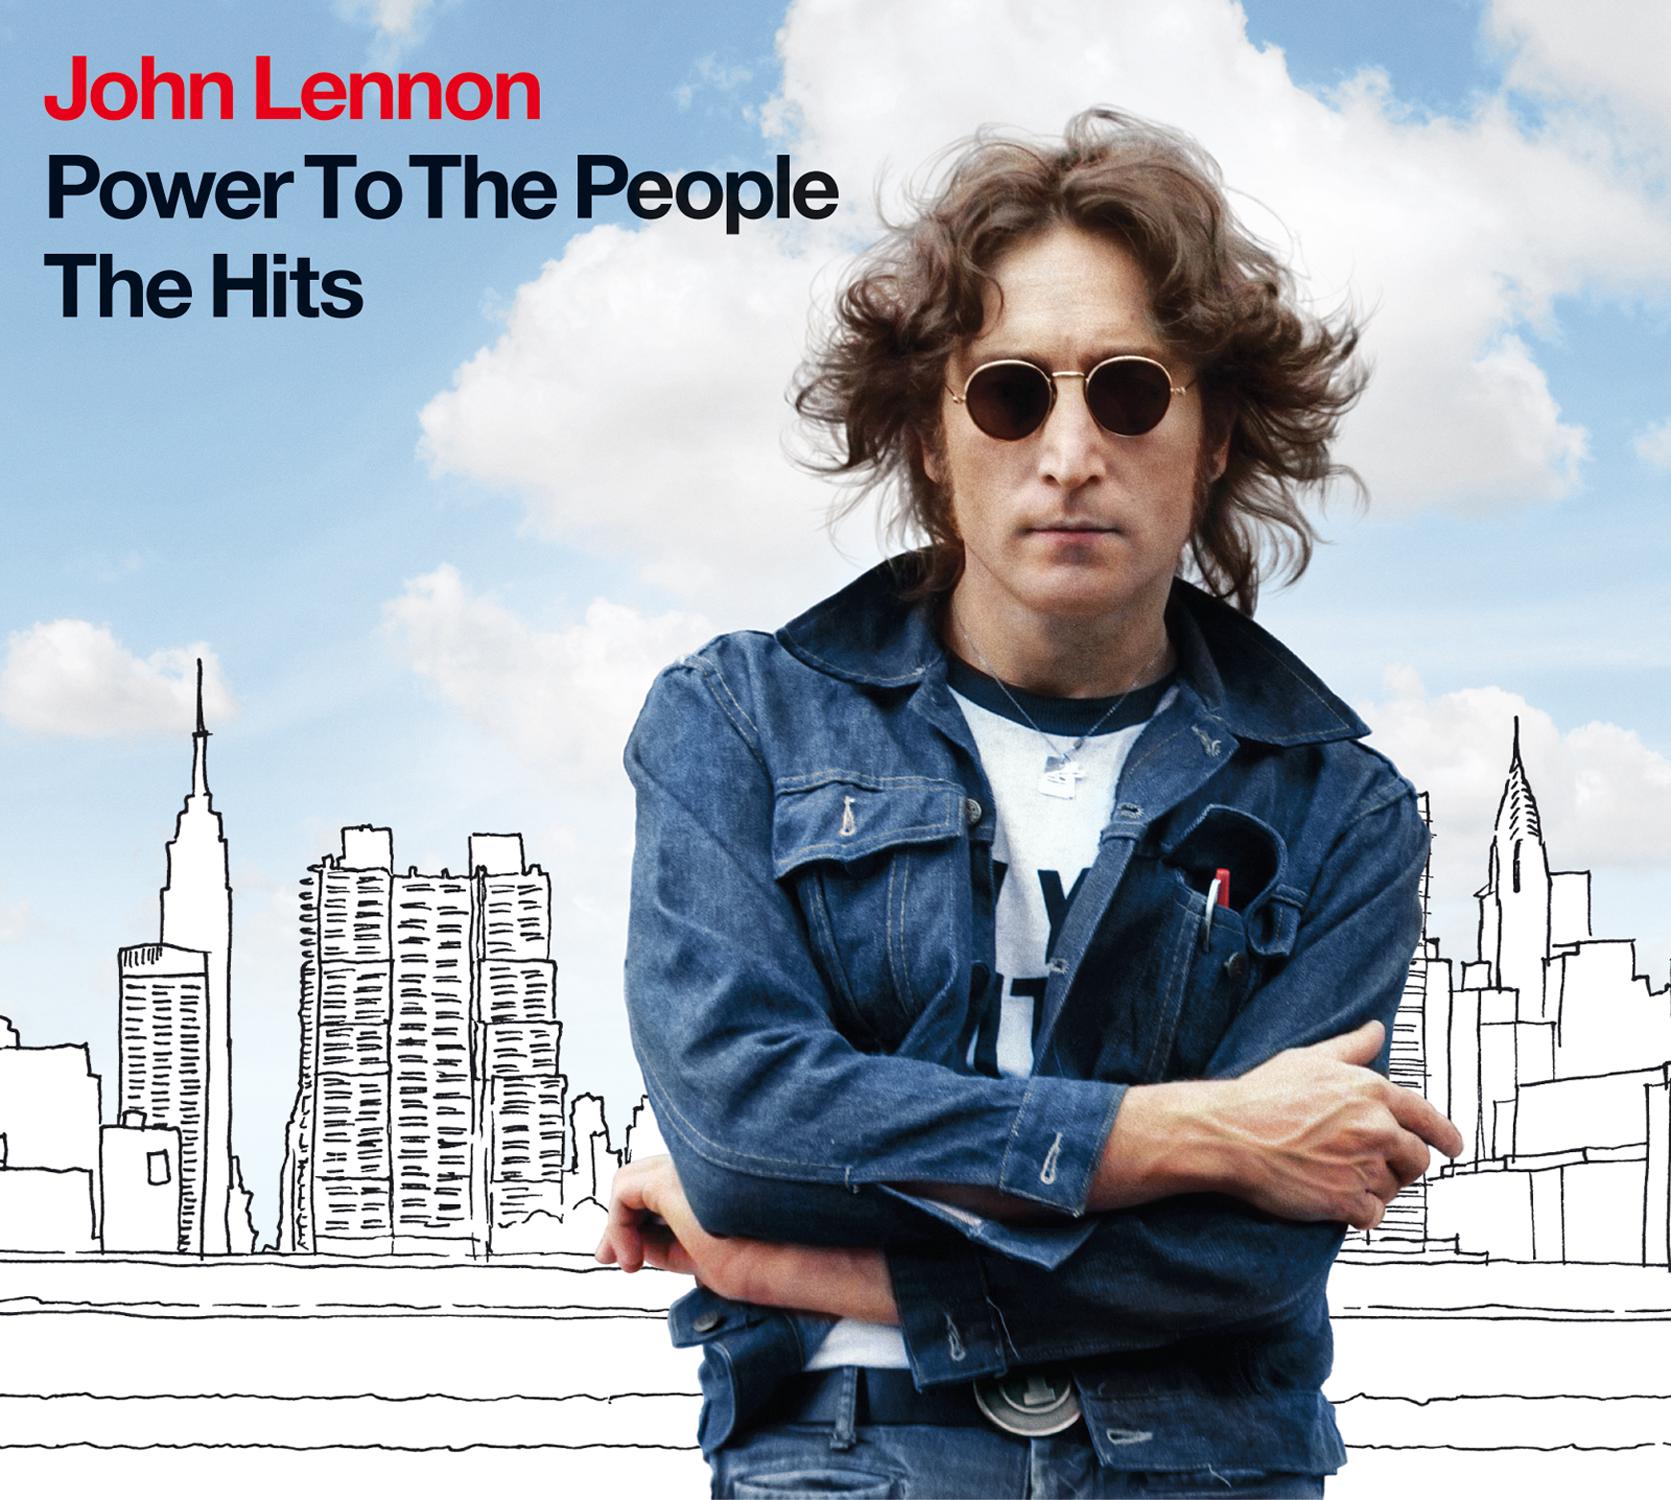 JOHN LENNON / ジョン・レノン / POWER TO THE PEOPLE - THE HITS